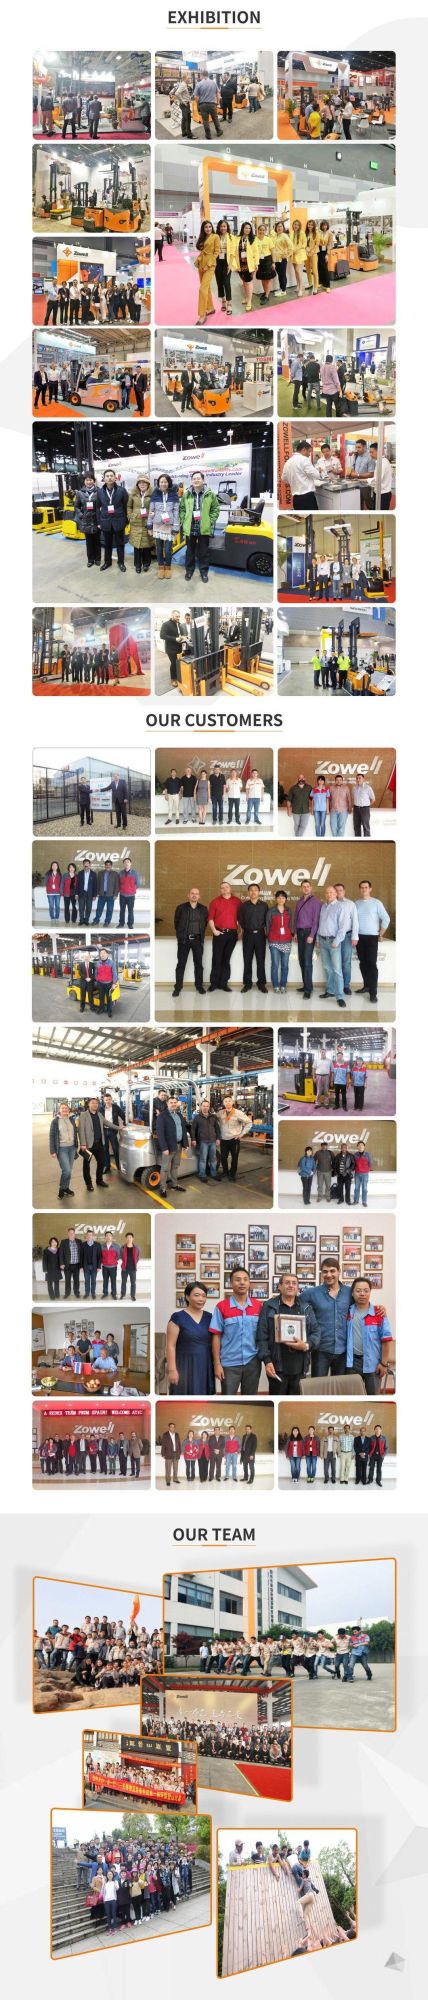 Zowell Scissor Extension Aerial Hydraulic Table High Altitude Lifting Platform Lift